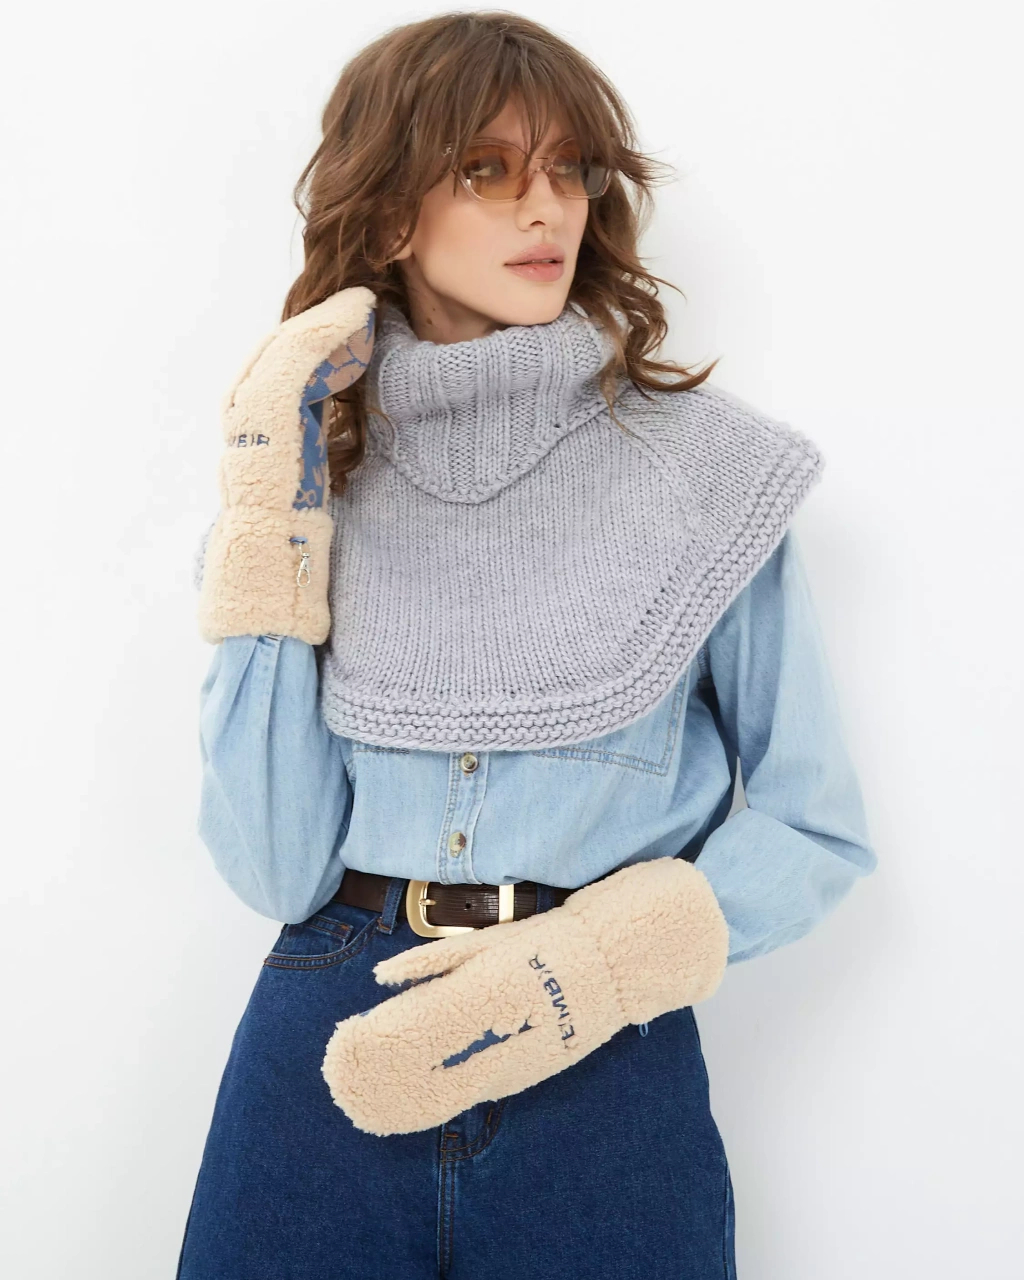 Nude Urban Bunny knitted gloves